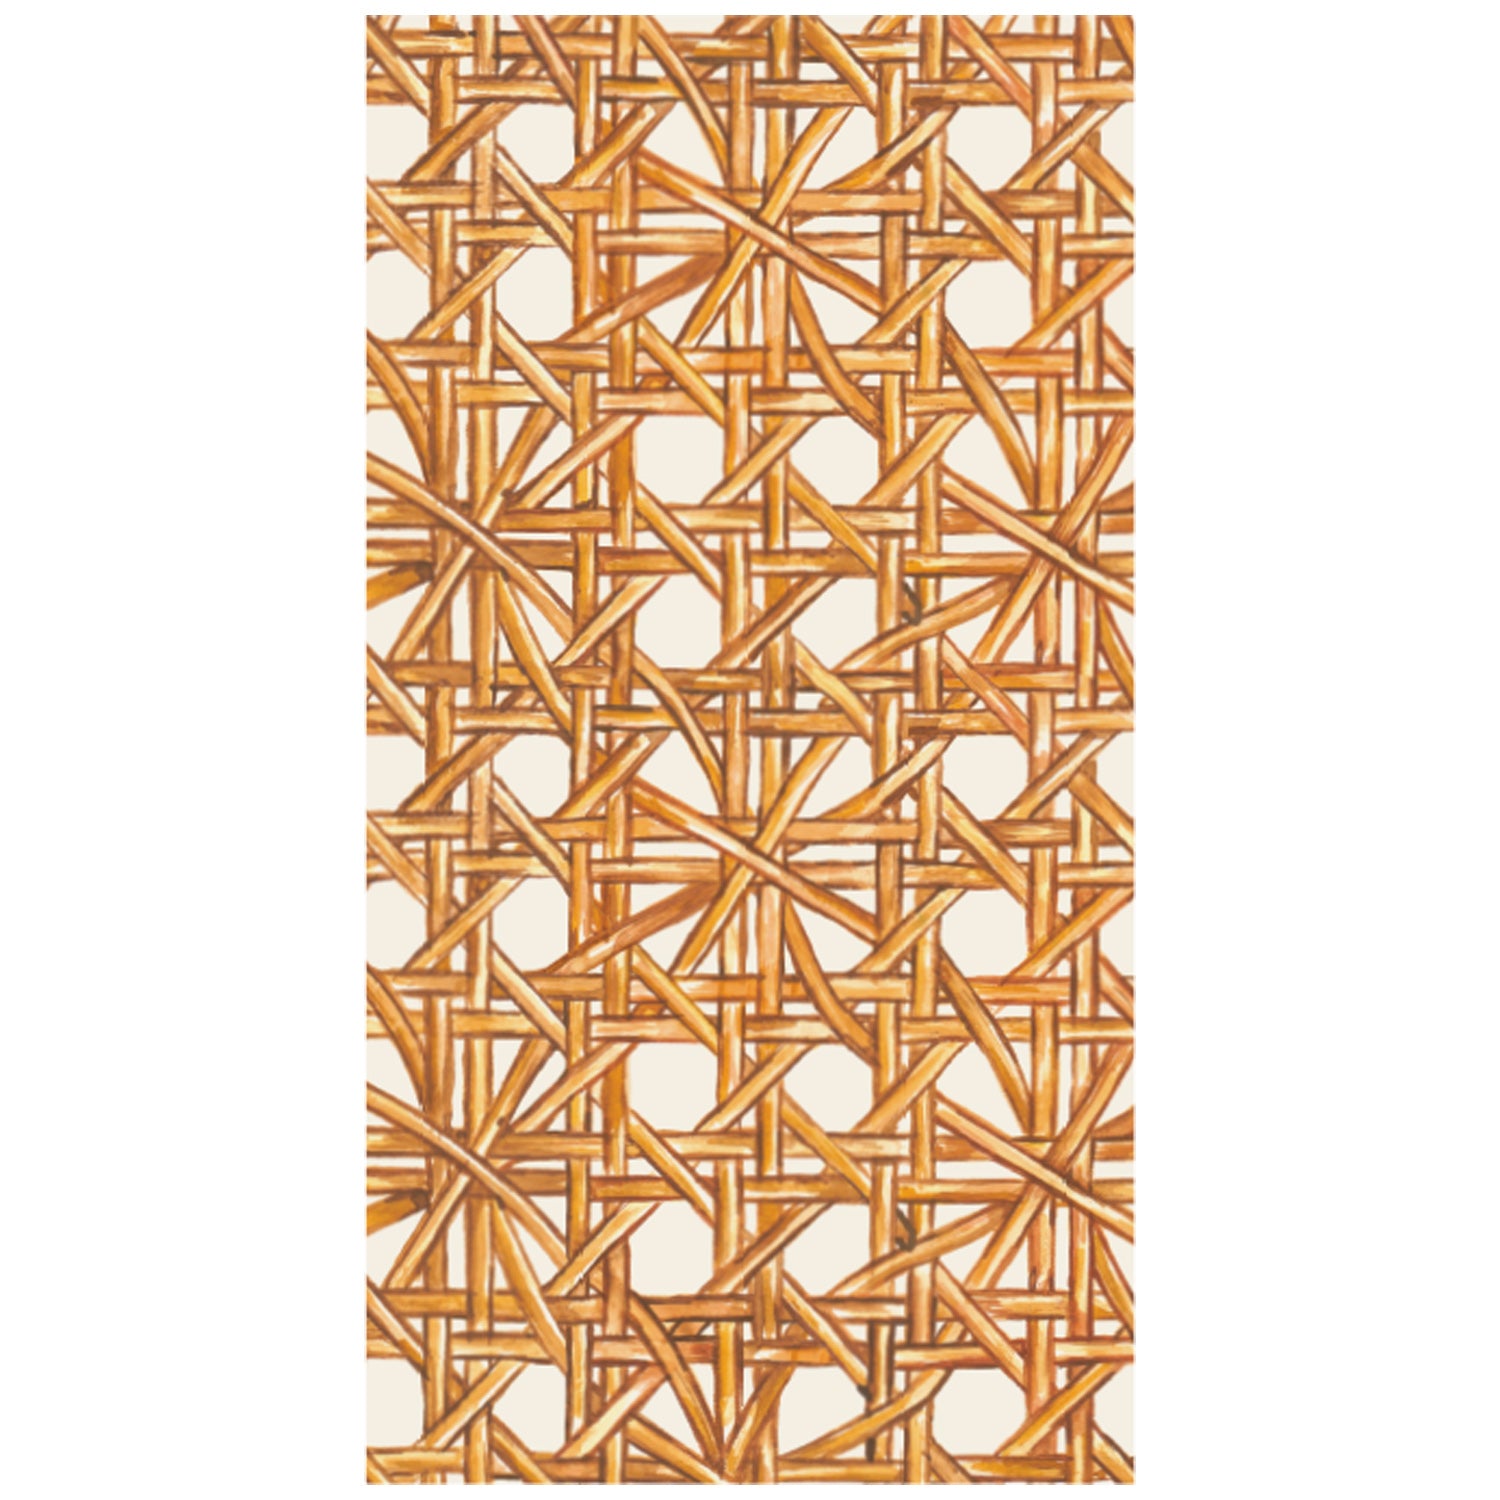 A vintage charm towel with a yellow and white design, featuring a Rattan Weave pattern reminiscent of Hester &amp; Cook&